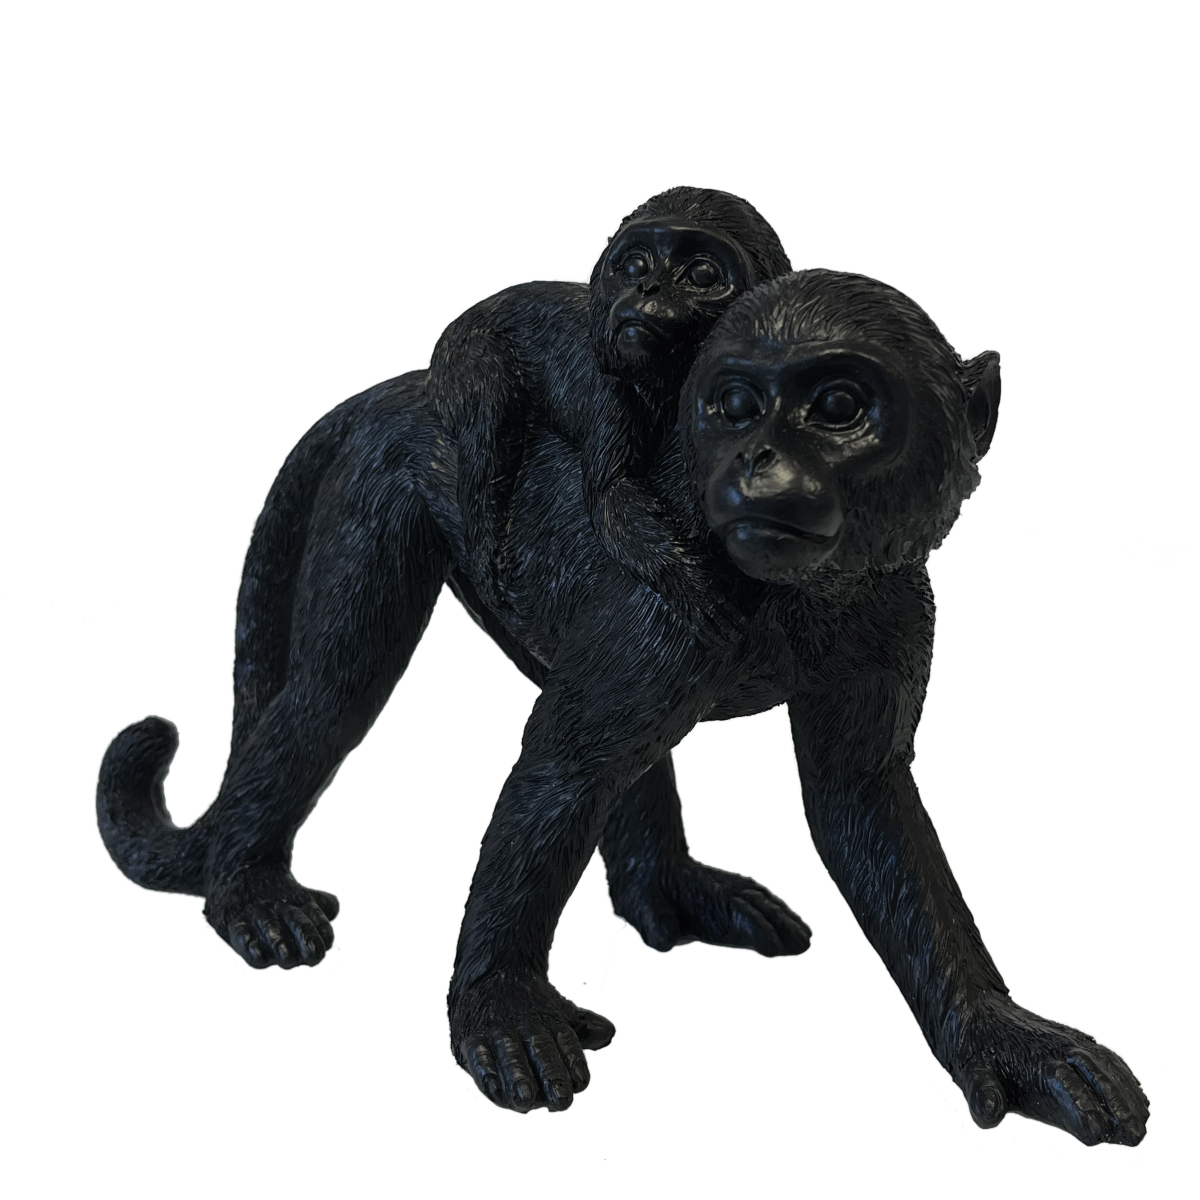 Decorative statuette Mother monkey and baby